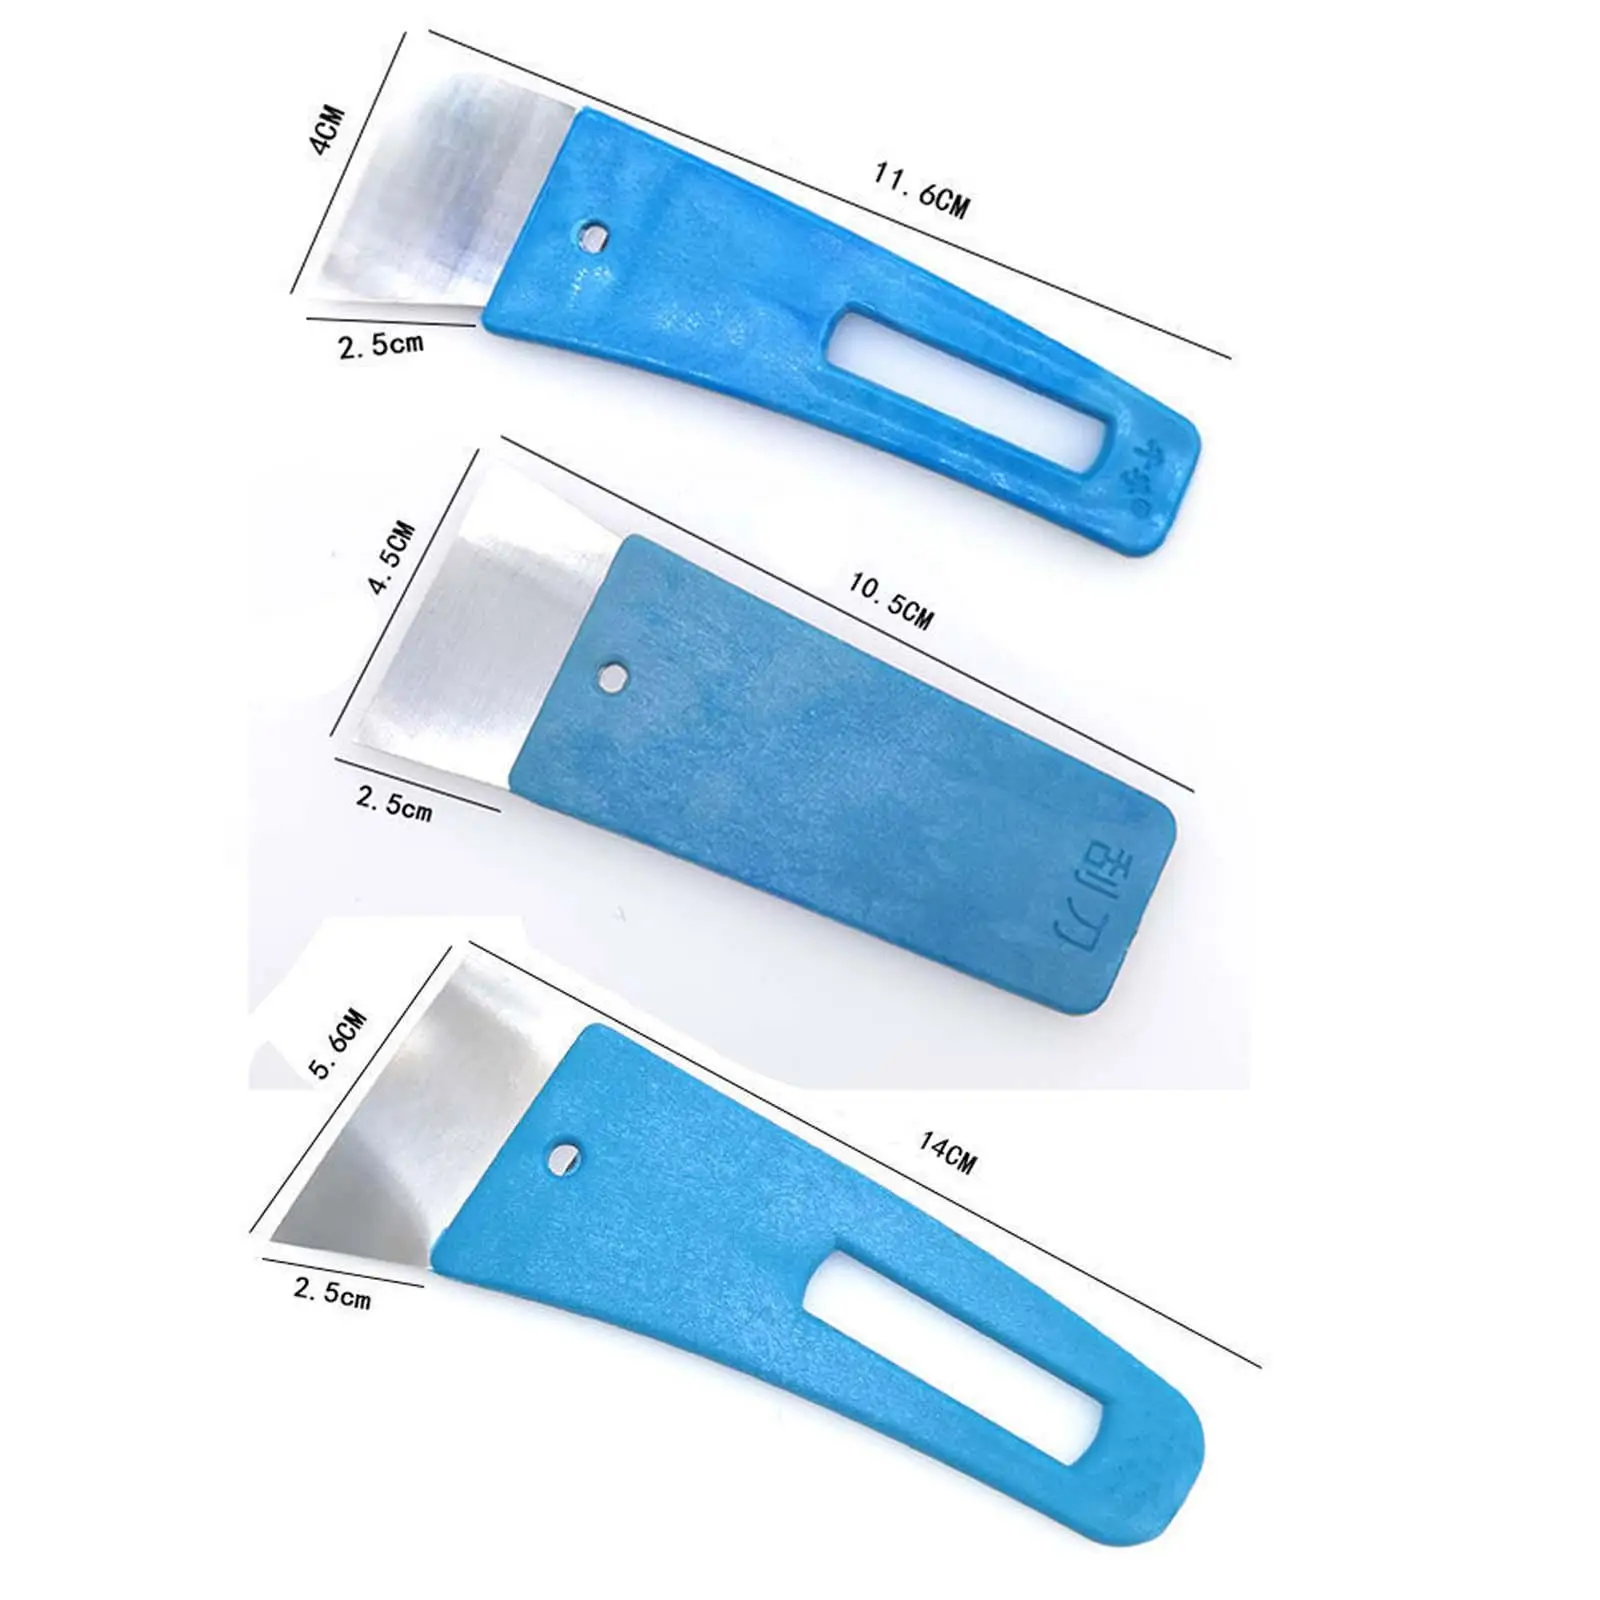 3 Pieces Car Window Film Scraper Squeegee Set Pushing Out Bubble Lines Improving Efficiency Cleaning Durable Comfortable Grip